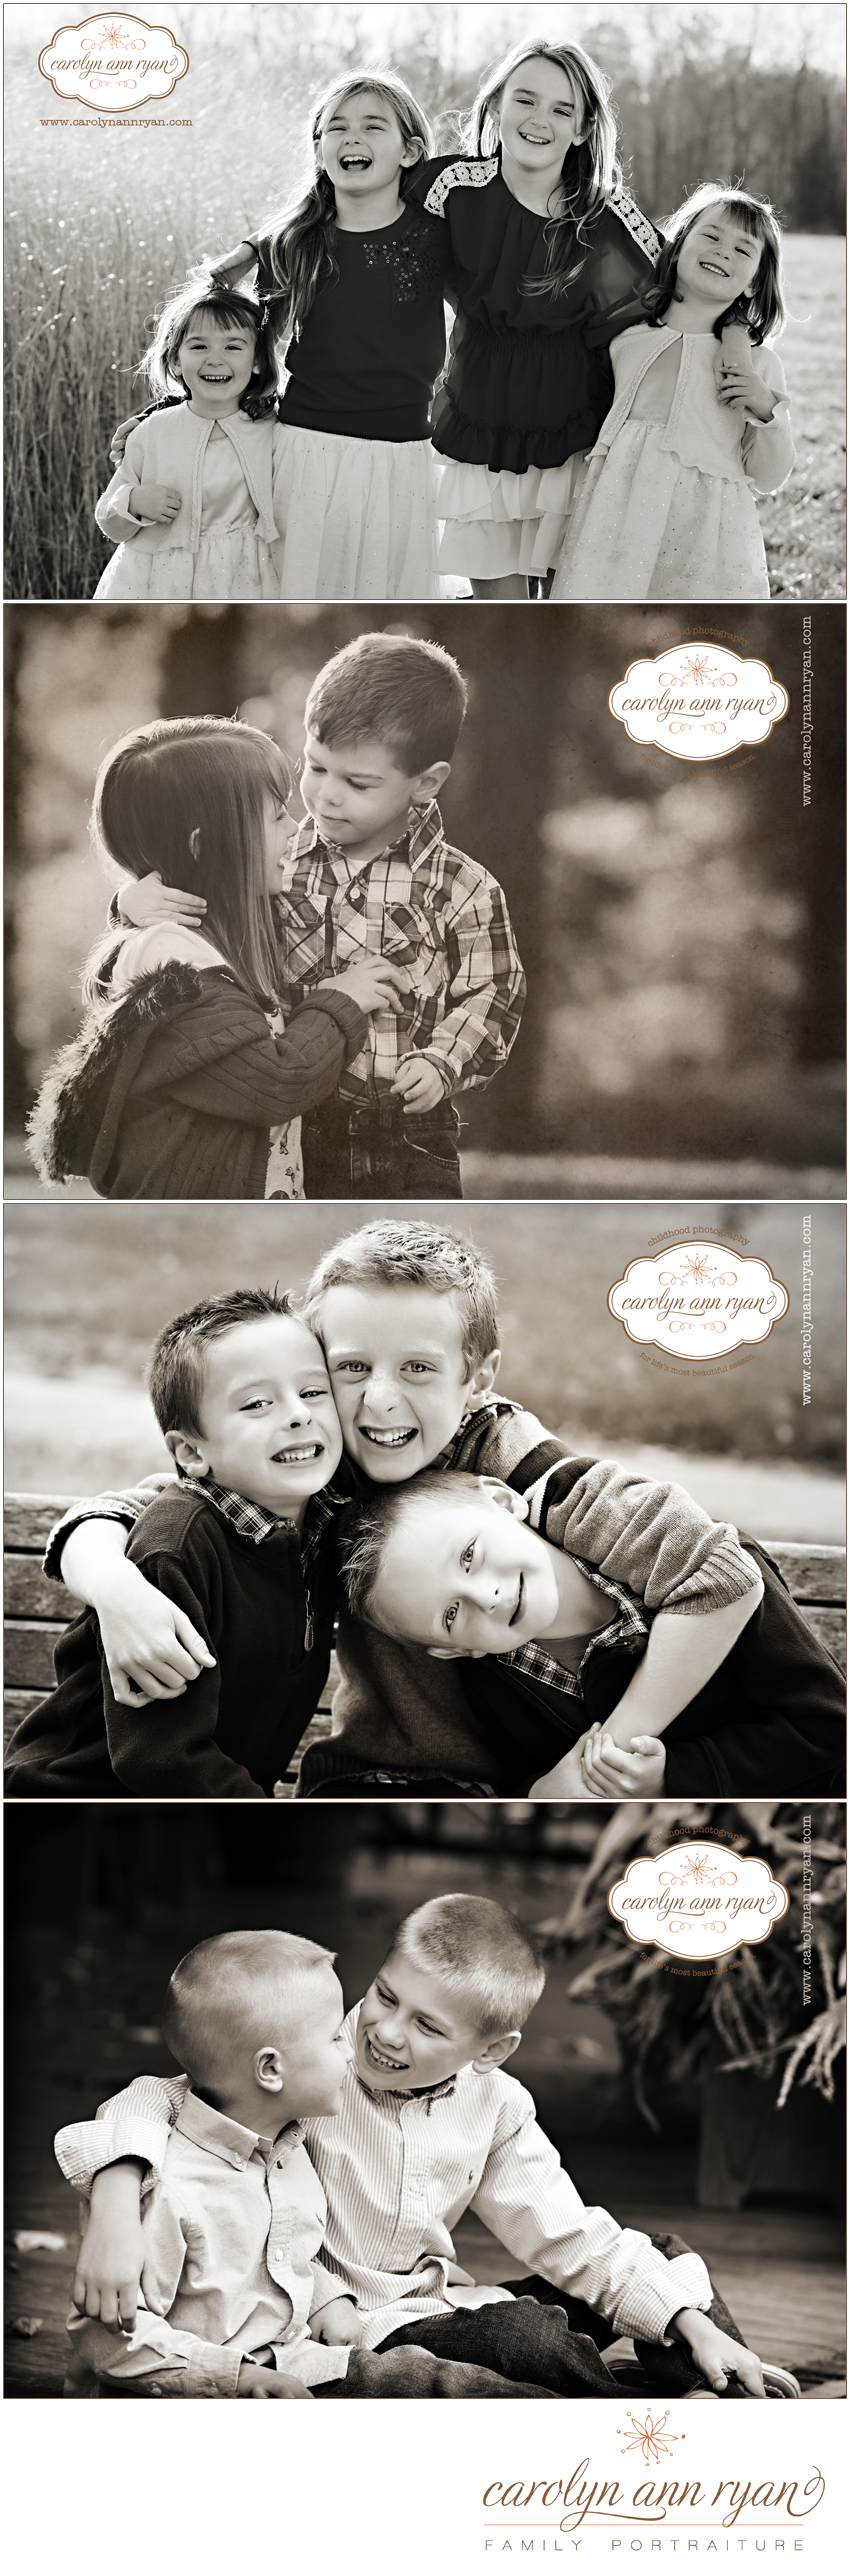 The Carolinas Family Photographer shares samples of the backs of Holiday Card Designs for clients